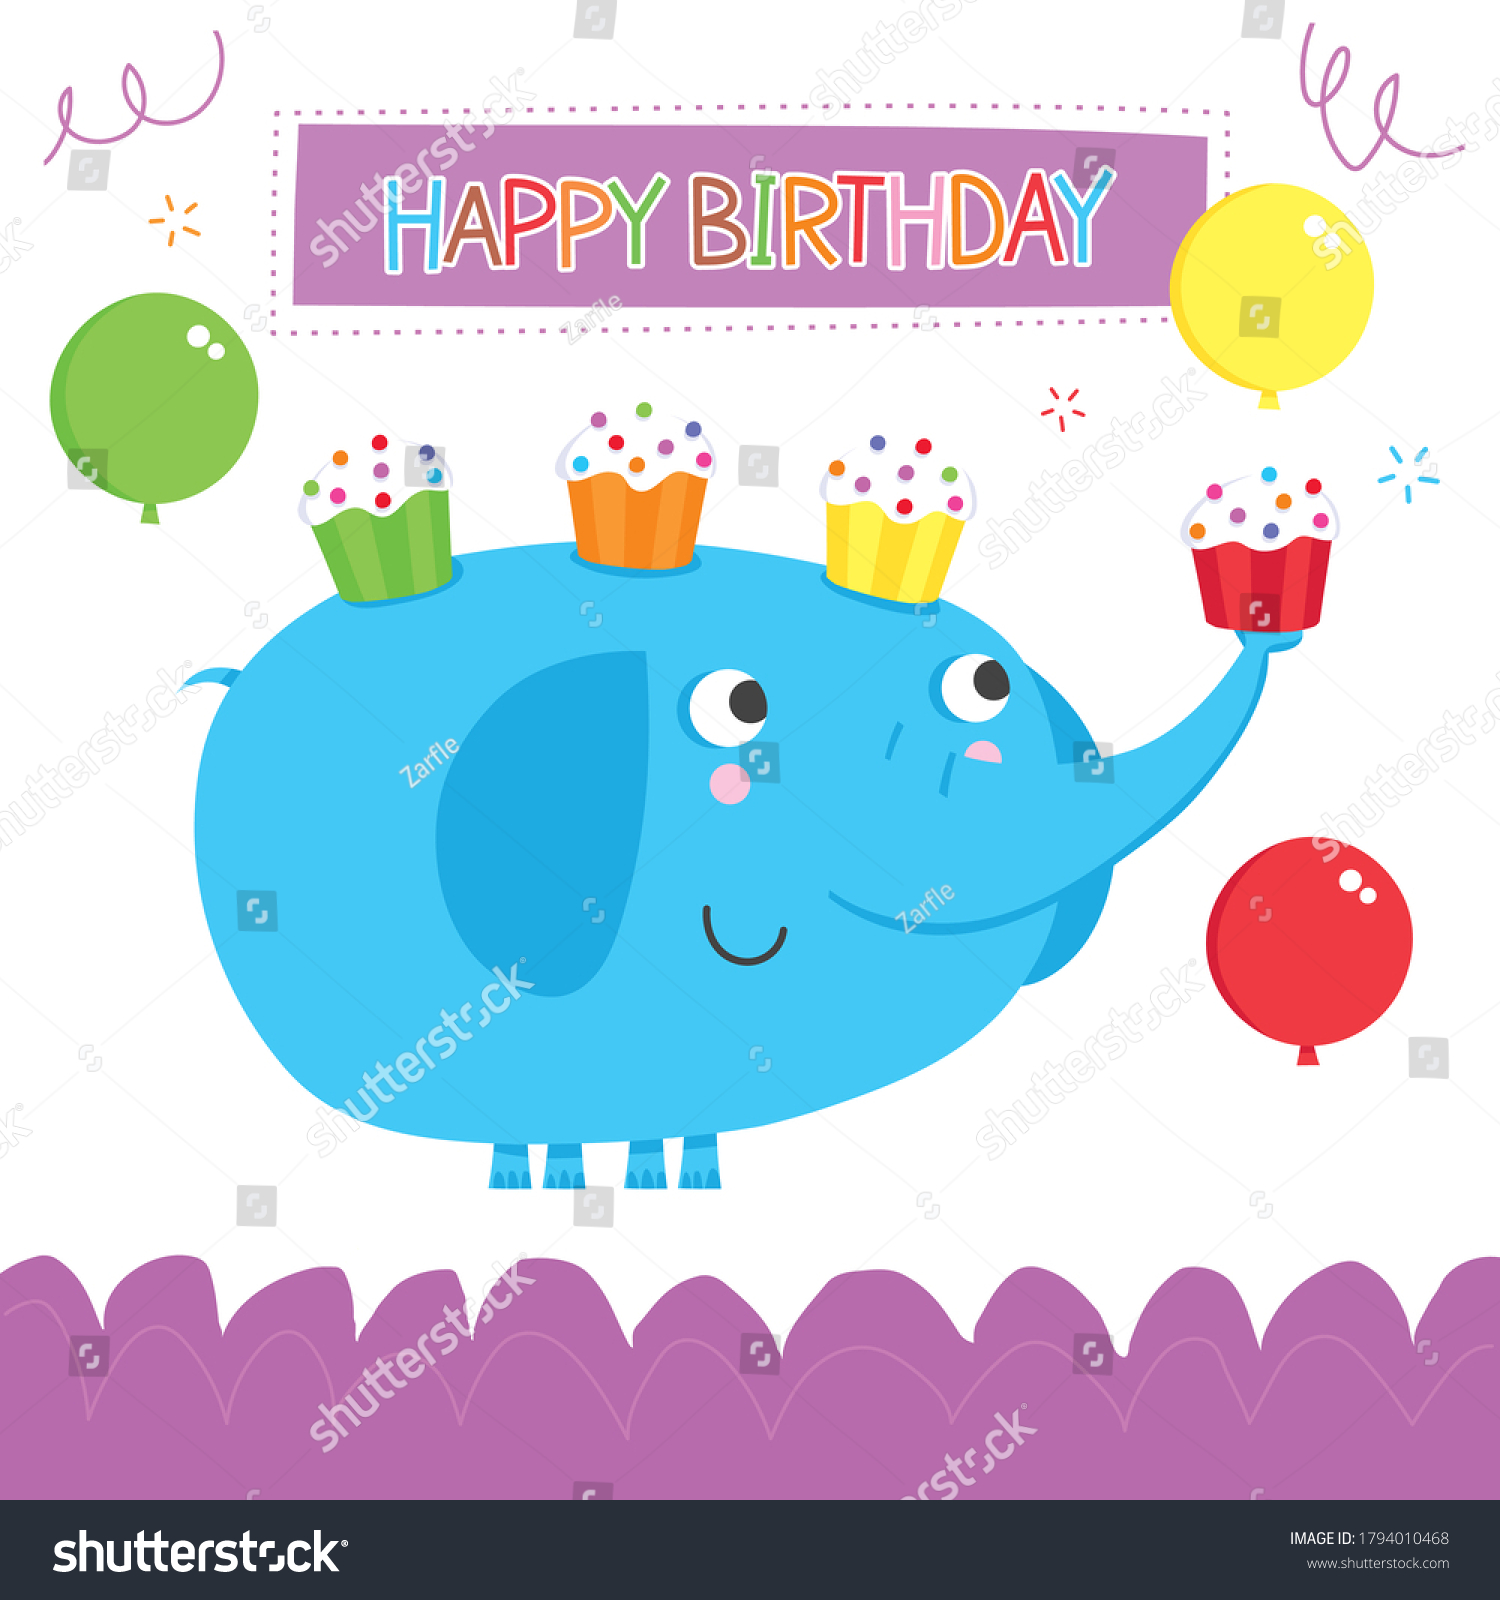 SVG of Cute birthday card of nice elephant with balloons and cake. svg